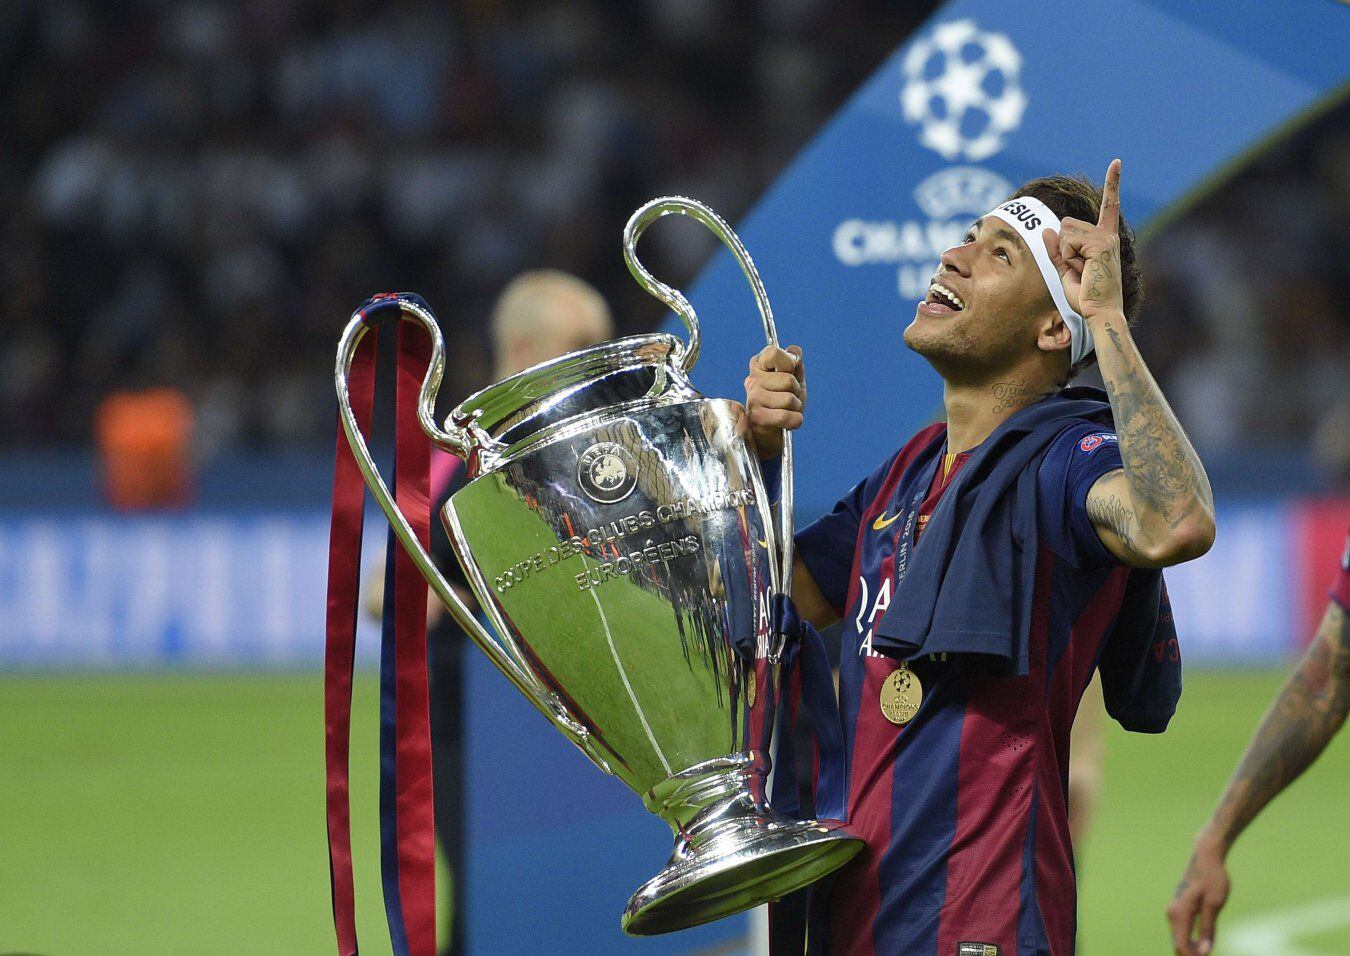 When was the last time Barcelona won the Champions League?